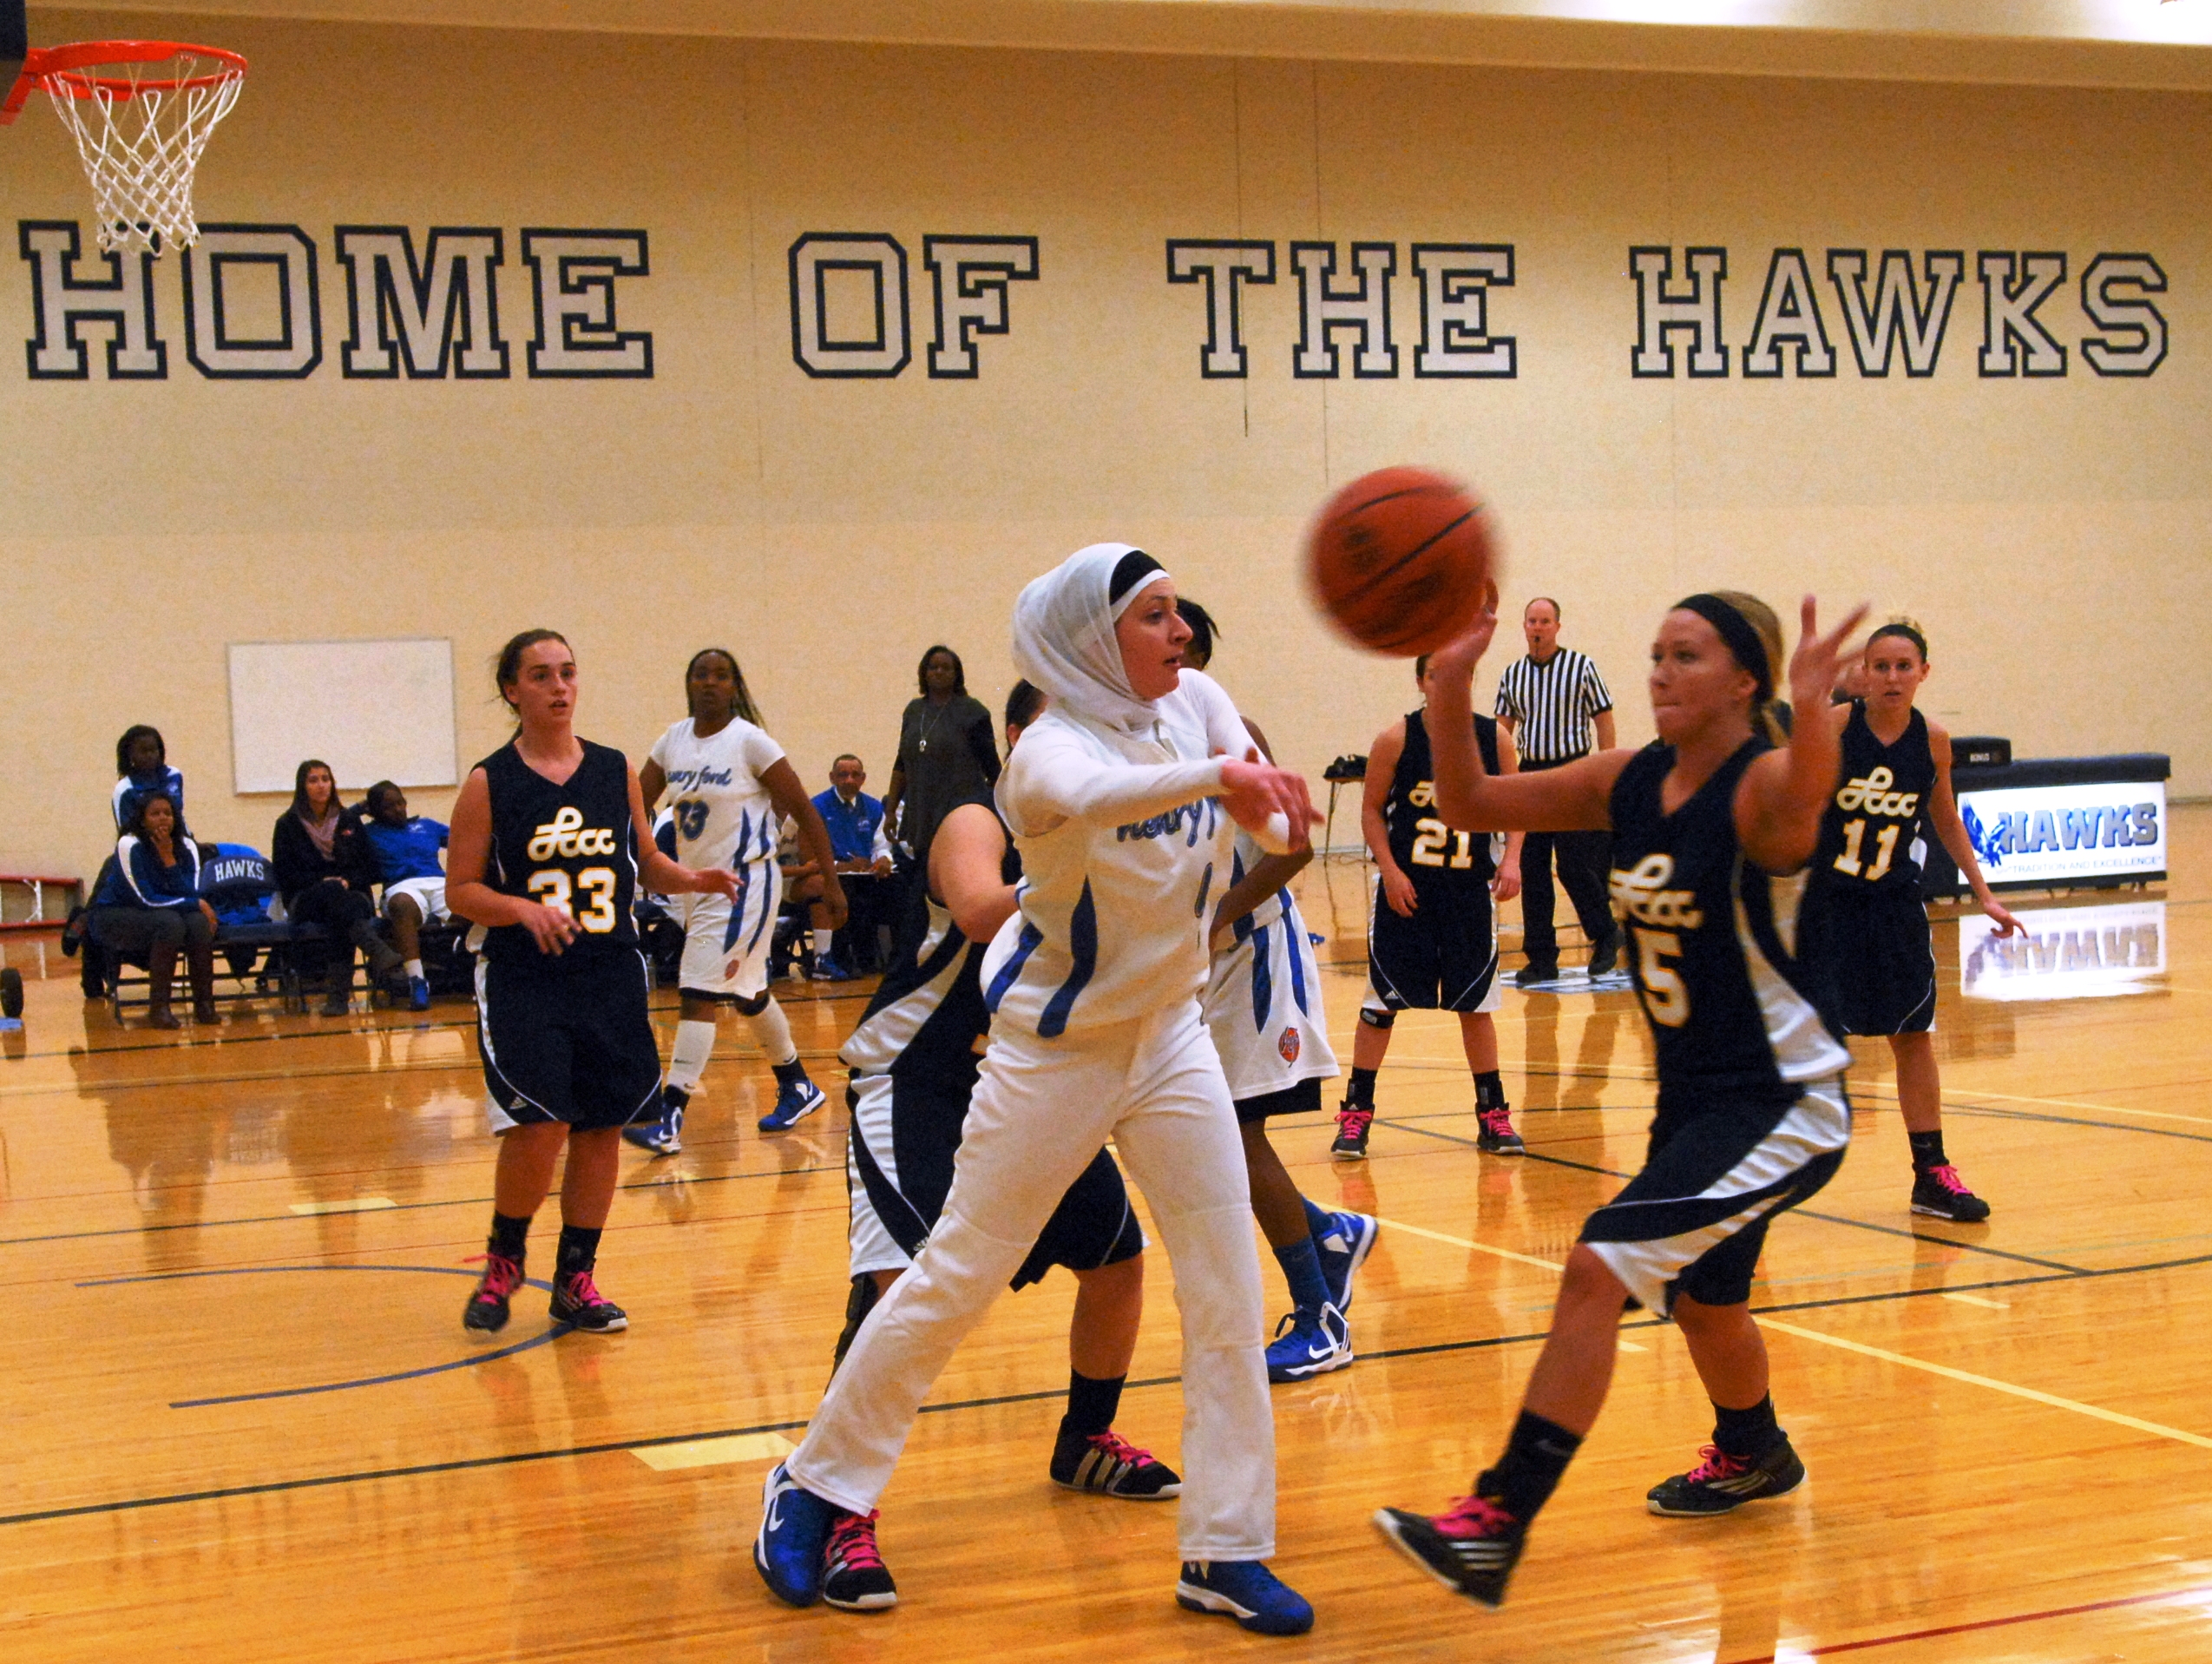 Lady Hawks in action